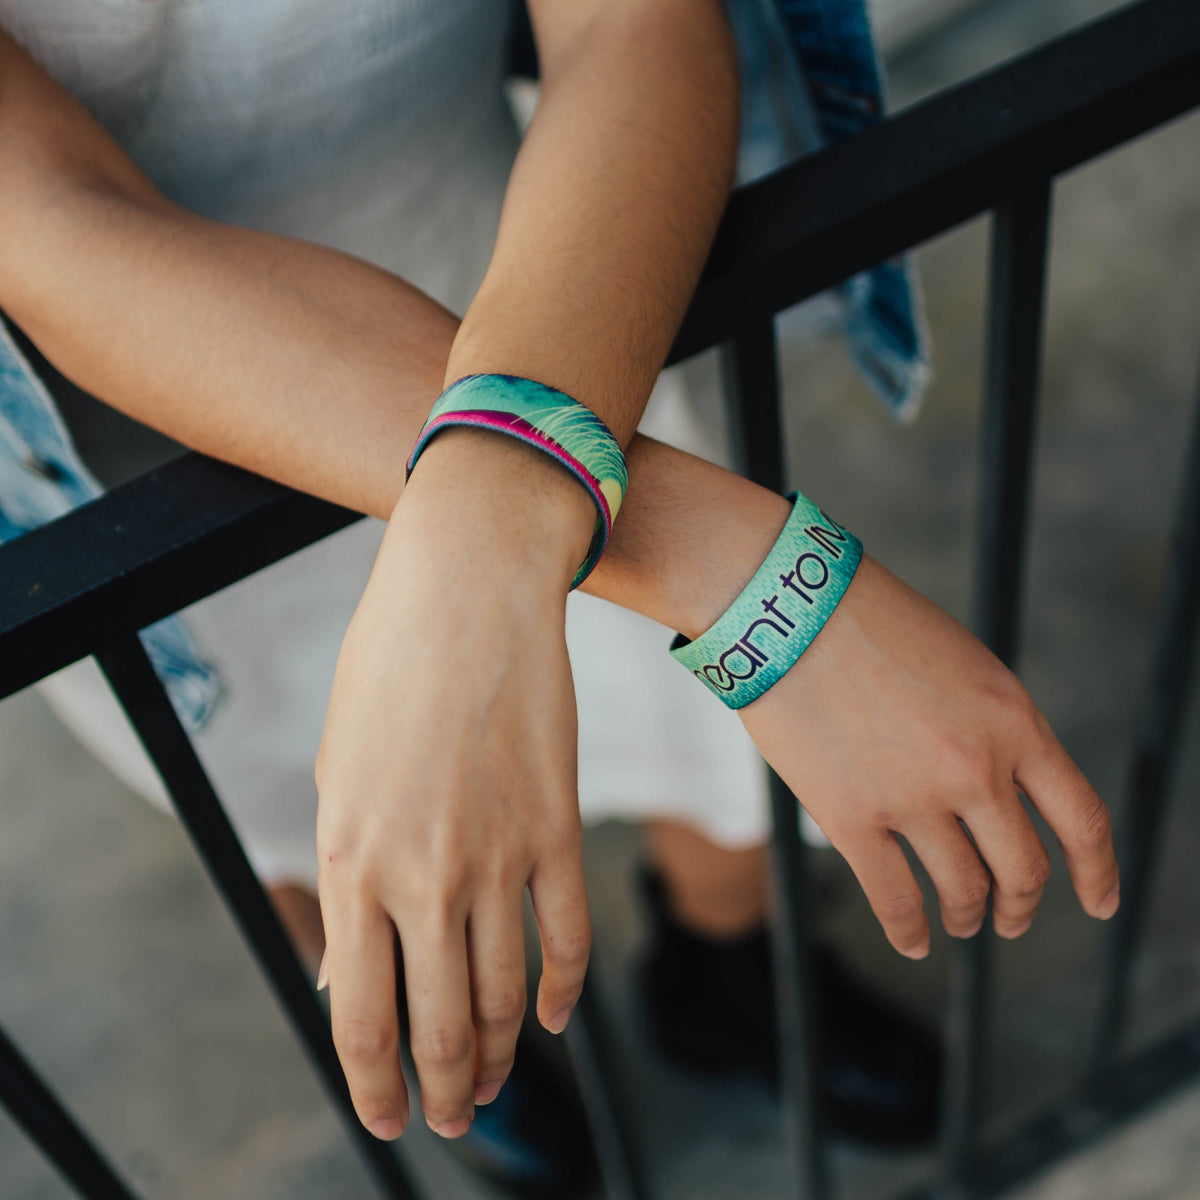 Meant To Live-Sold Out-ZOX - This item is sold out and will not be restocked.